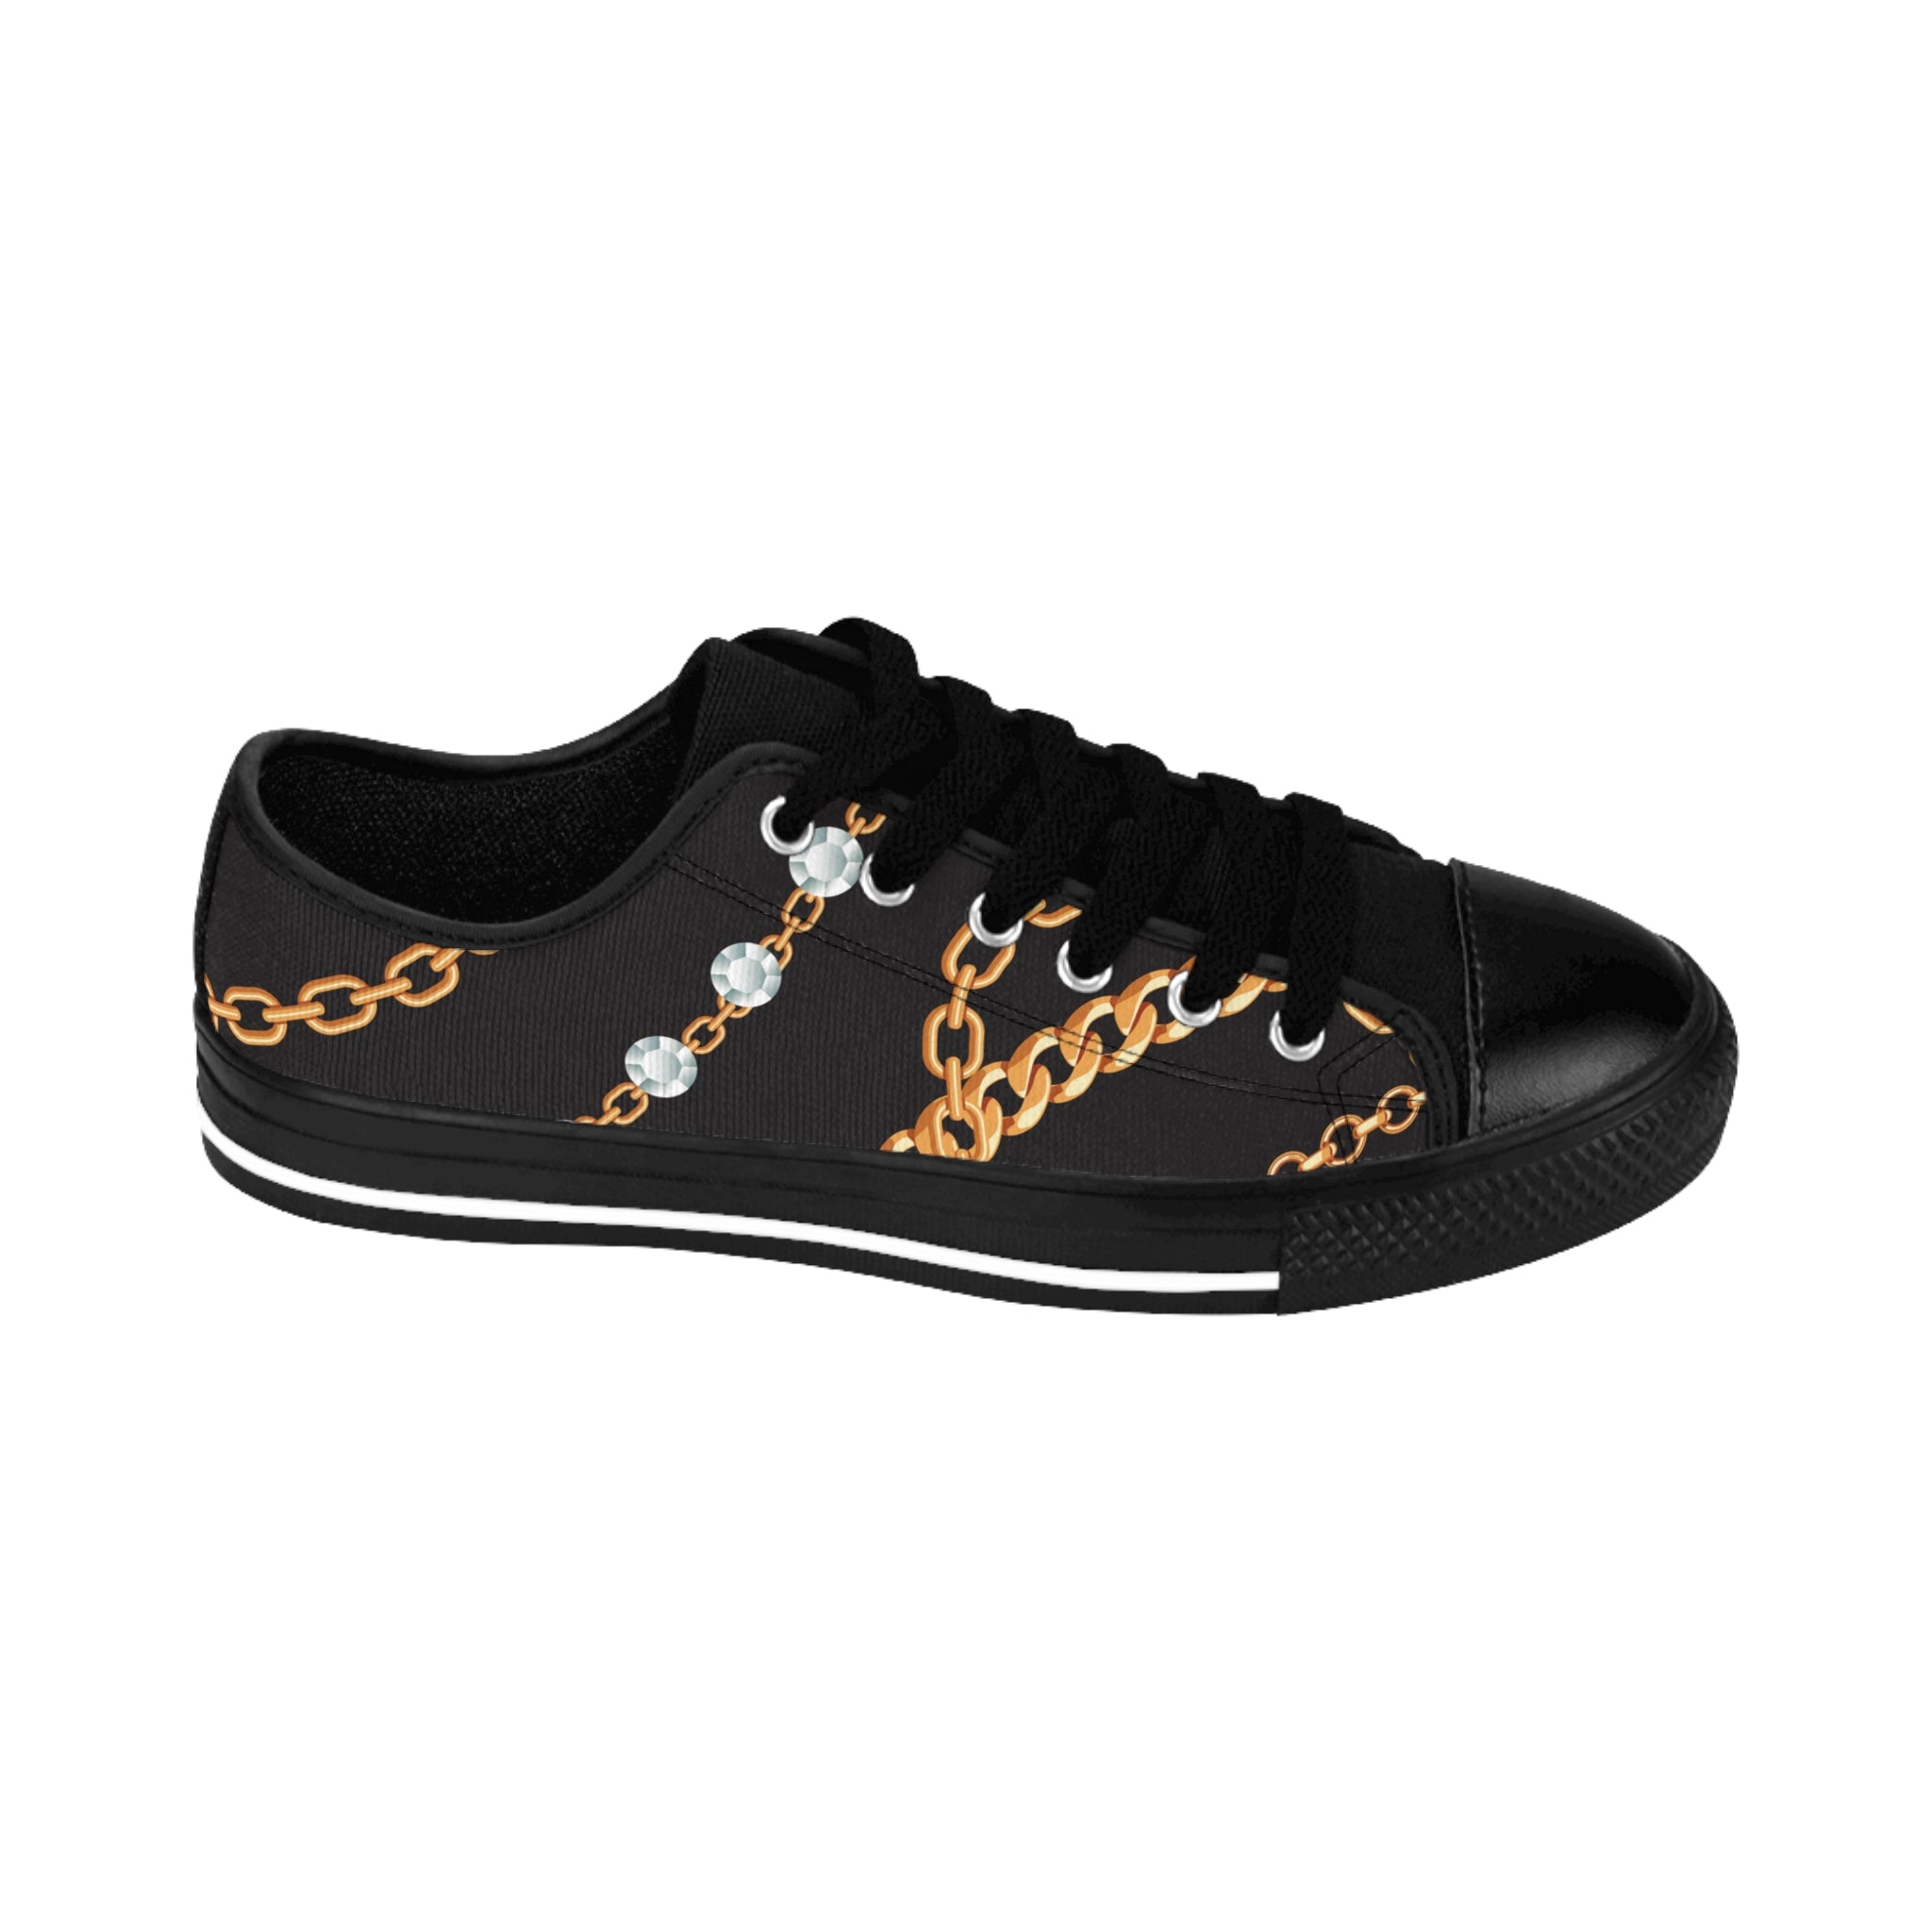 Designer Collection (Chains + Diamonds) Black Women's Low Top Canvas Shoes Shoes US-9-Black-sole The Middle Aged Groove